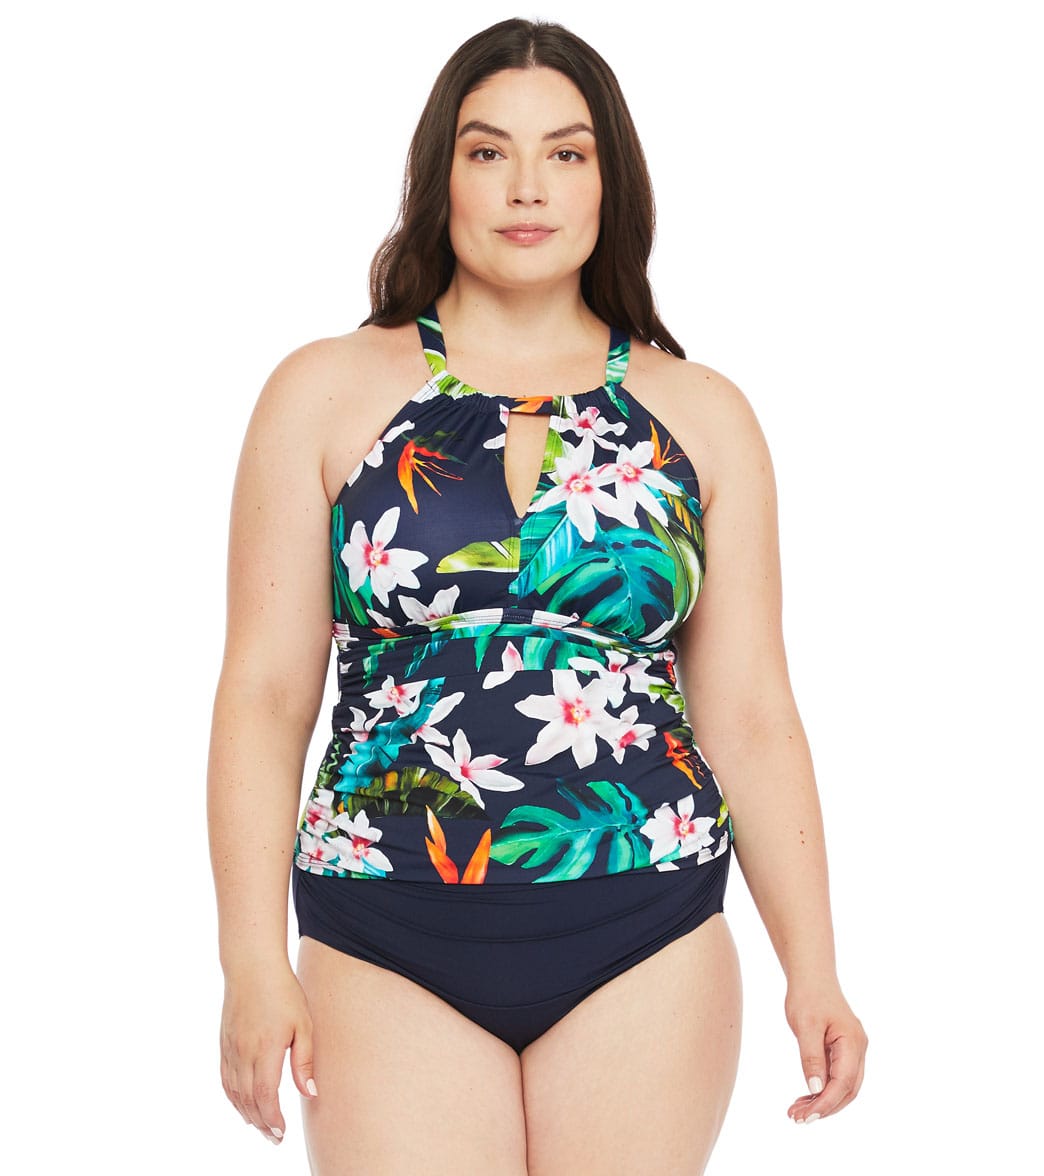 Ralph Lauren Plus Size Watercolor Tropical High Neck Tankini Top At Swimoutlet Com Free Shipping From the men's neckties that inspired the brand to women's. ralph lauren plus size watercolor tropical high neck tankini top